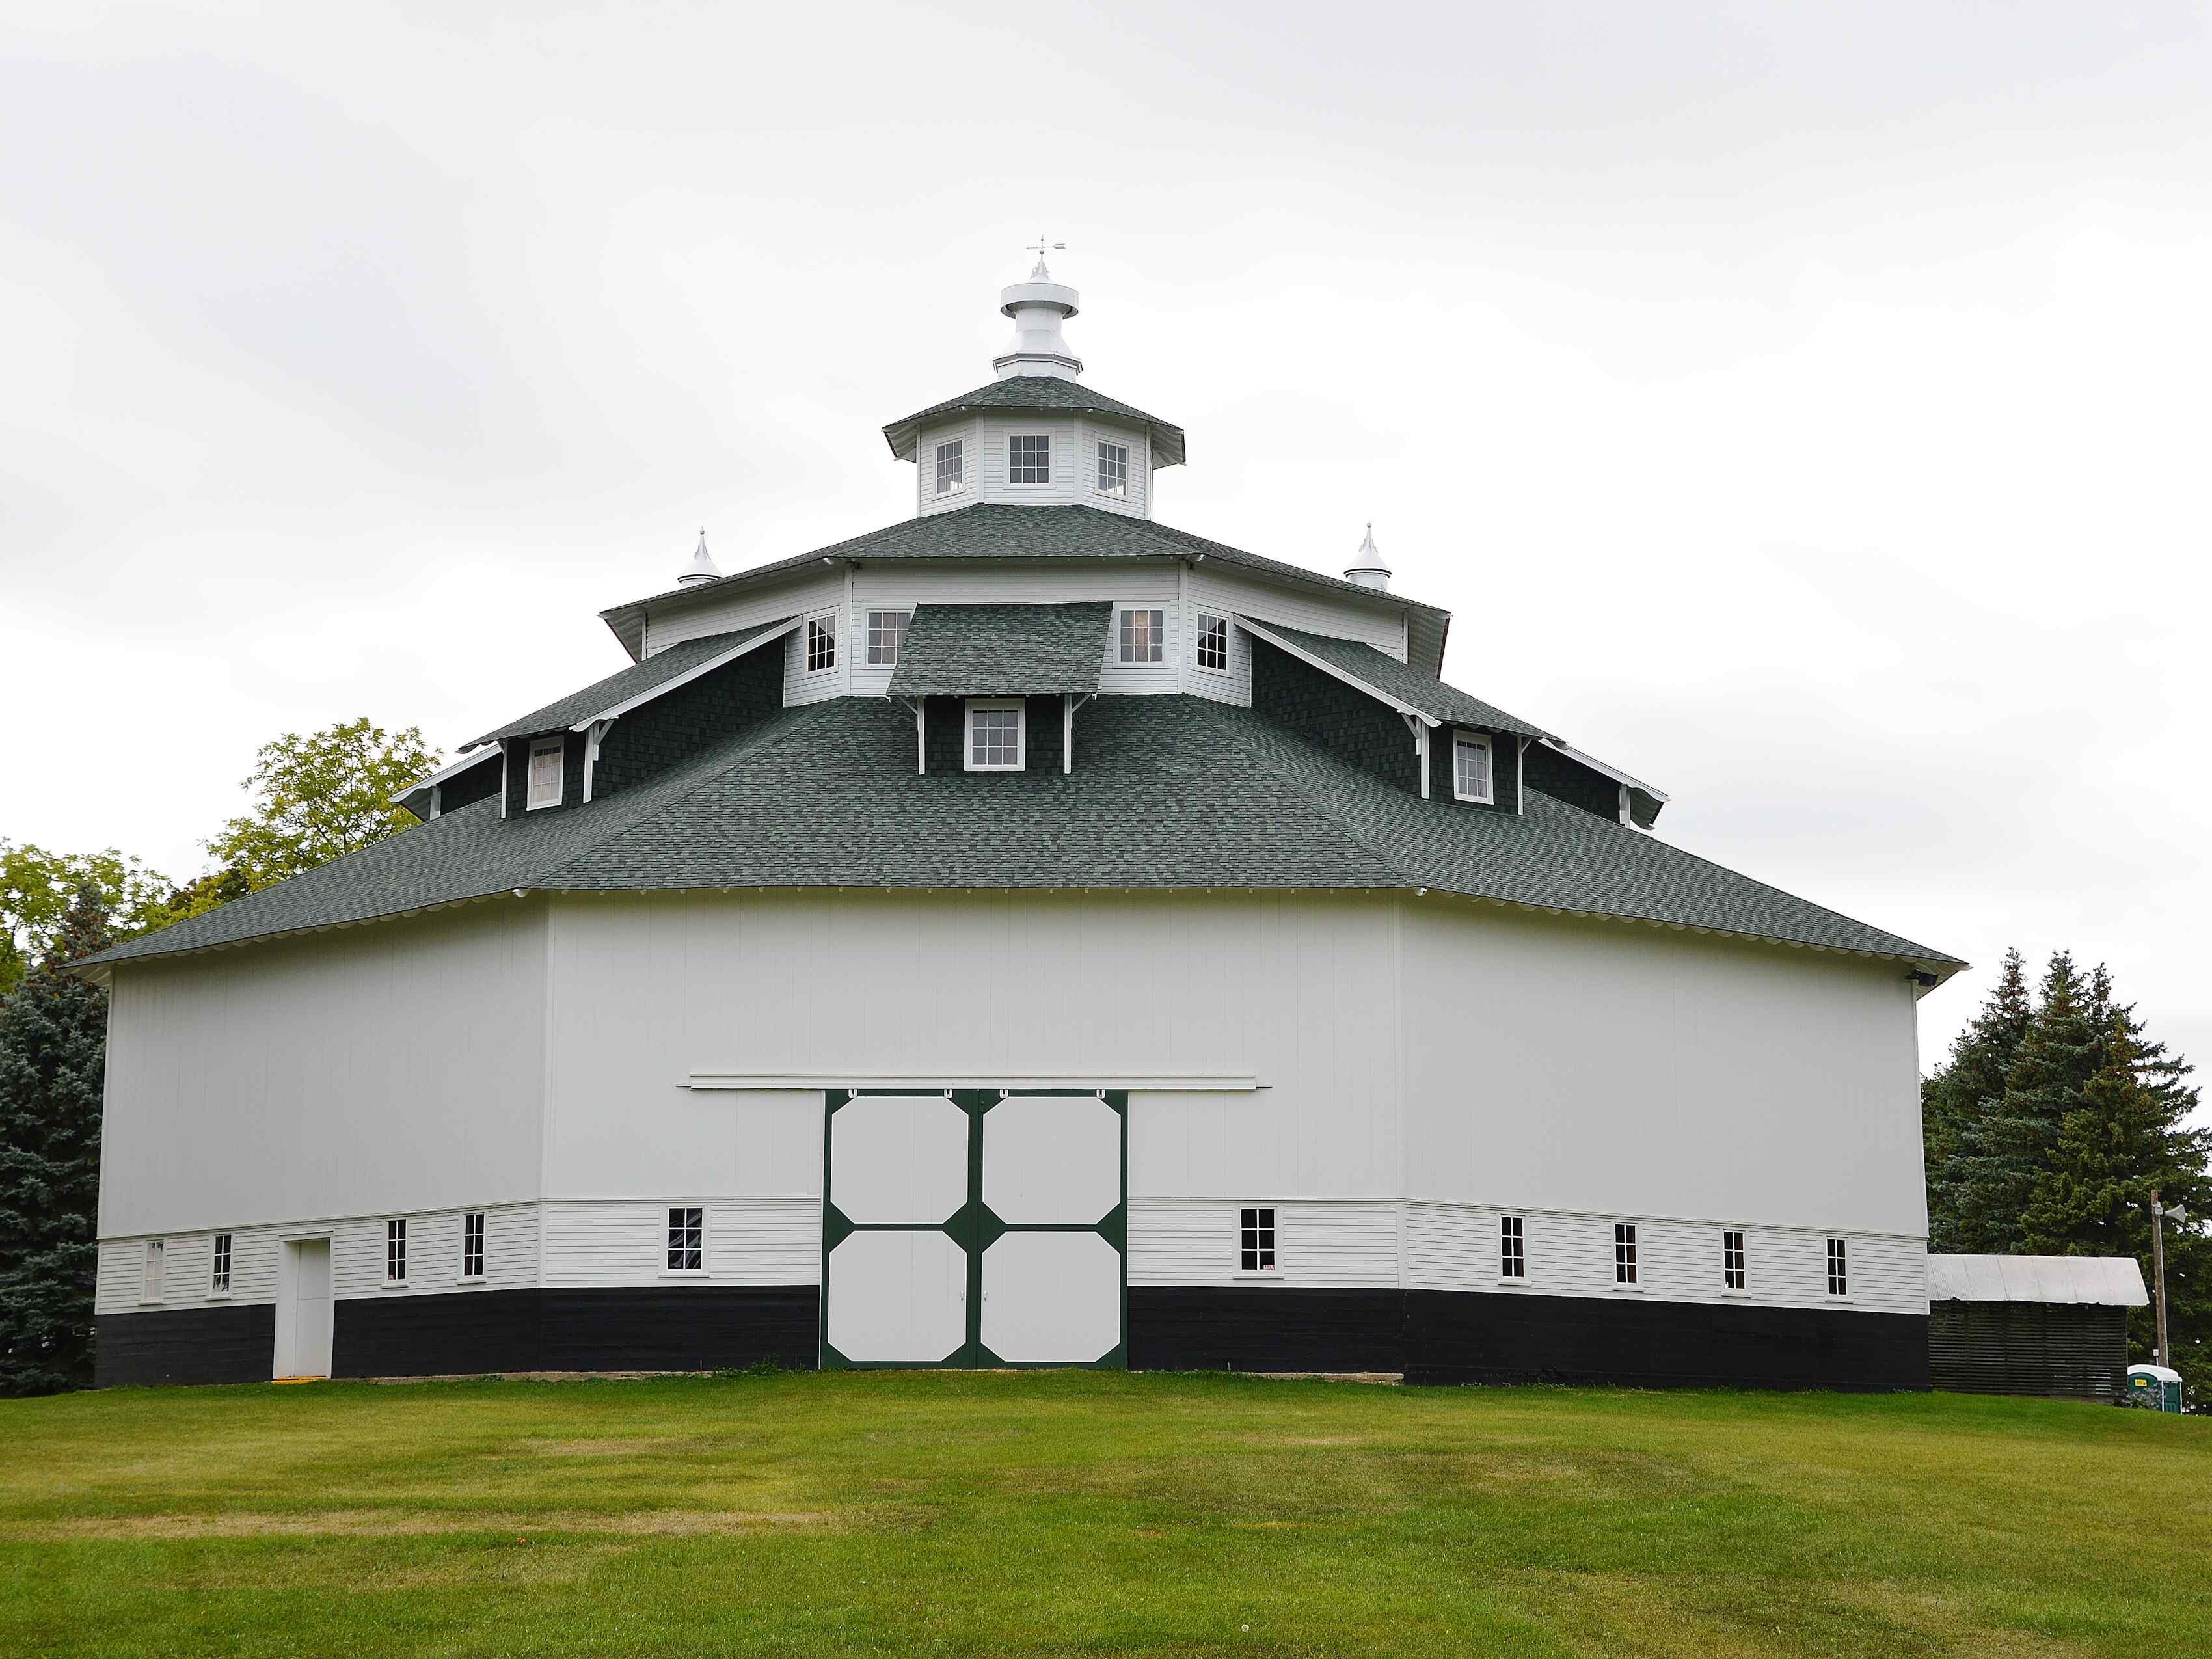 Built in 1924, this unusual barn is now the Thumb Octagon Barn Agricultural Museum in Gagetown.